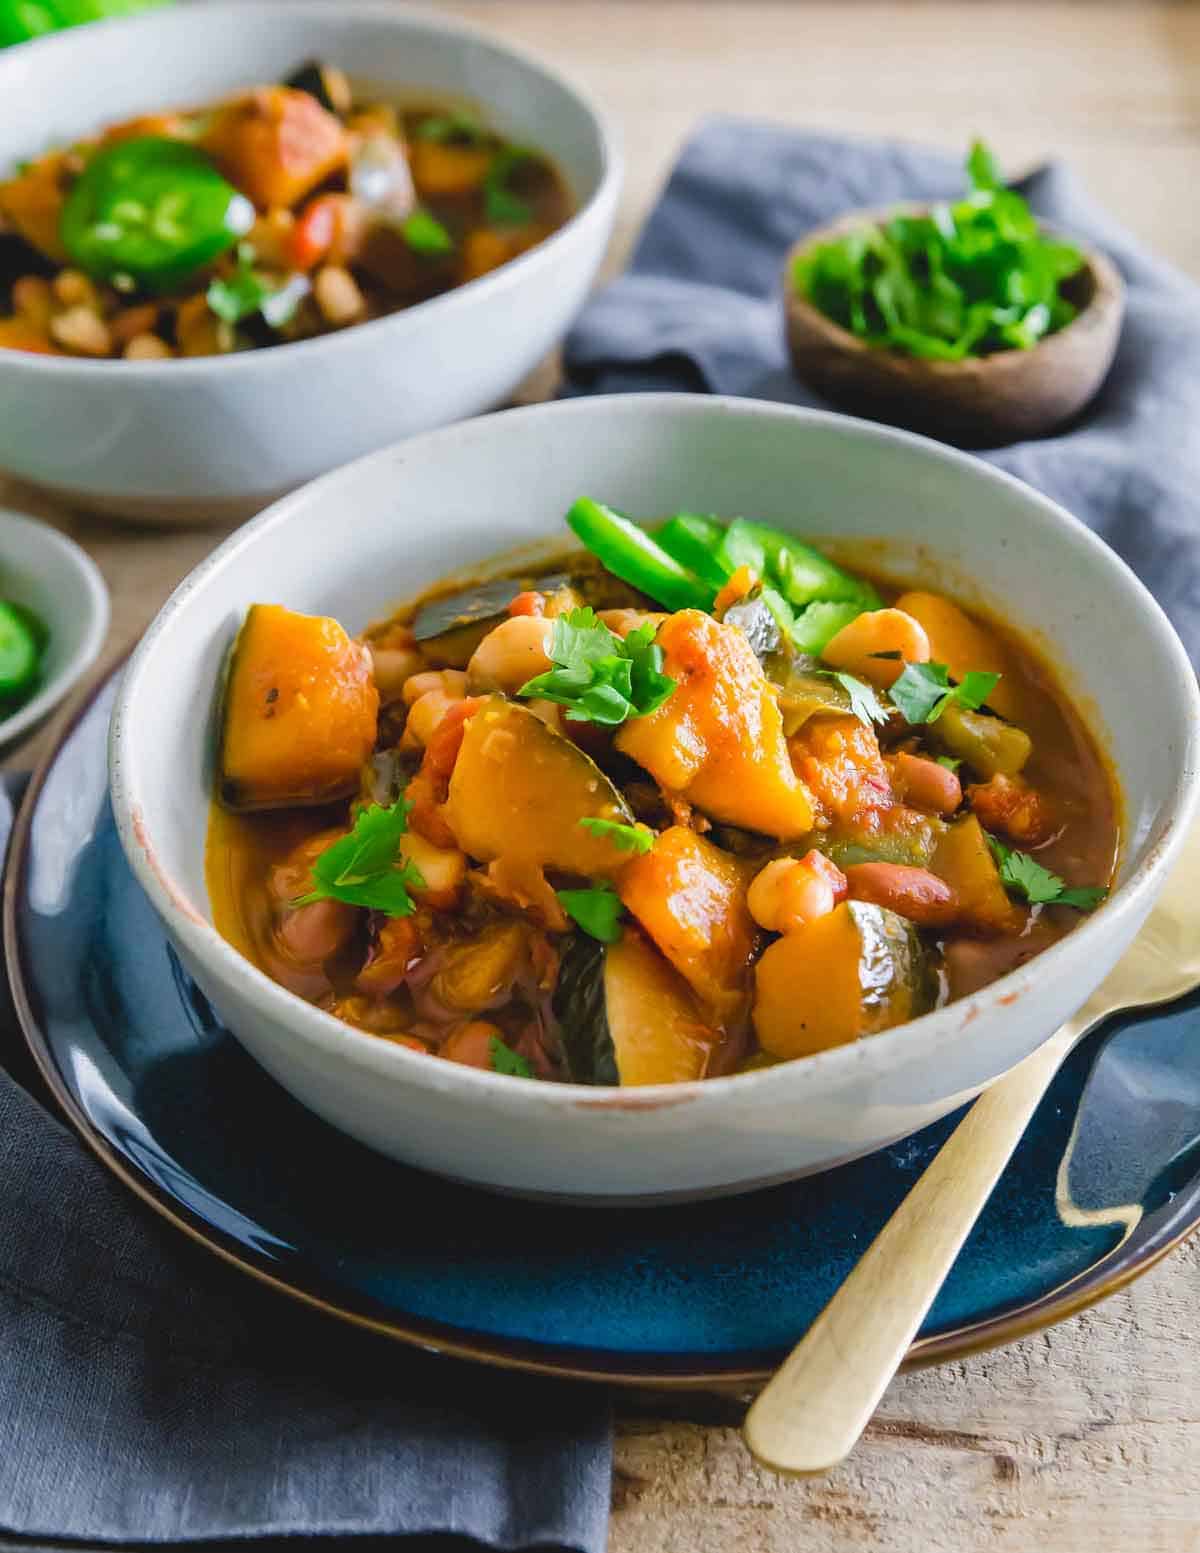 Kabocha squash chili made in the slow cooker is a hearty vegetarian chili that's filling, flavorful and great in the colder months when you can find kabocha squash in season.